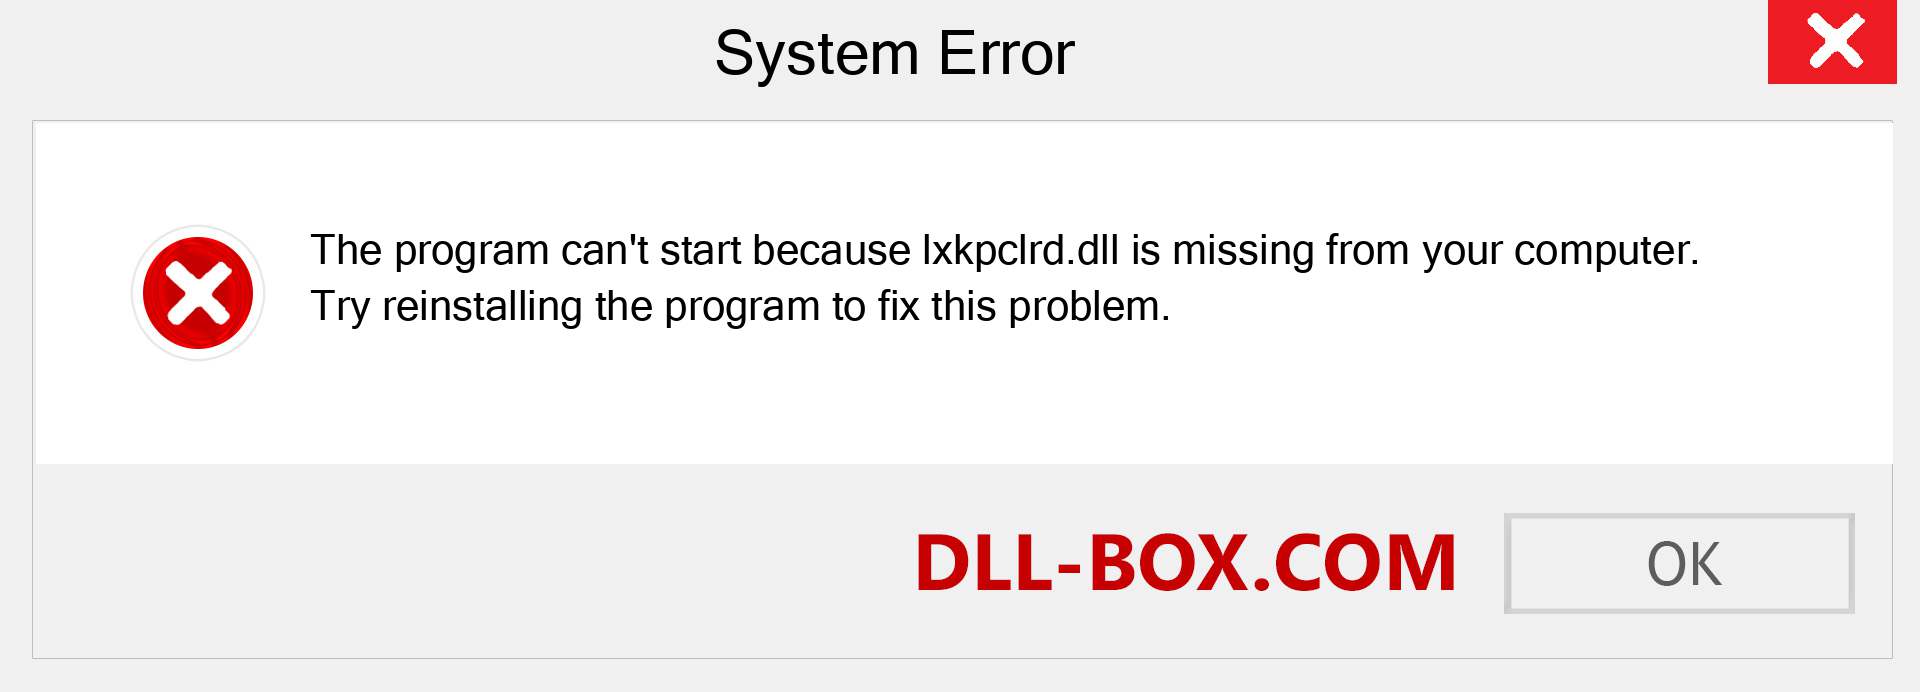  lxkpclrd.dll file is missing?. Download for Windows 7, 8, 10 - Fix  lxkpclrd dll Missing Error on Windows, photos, images